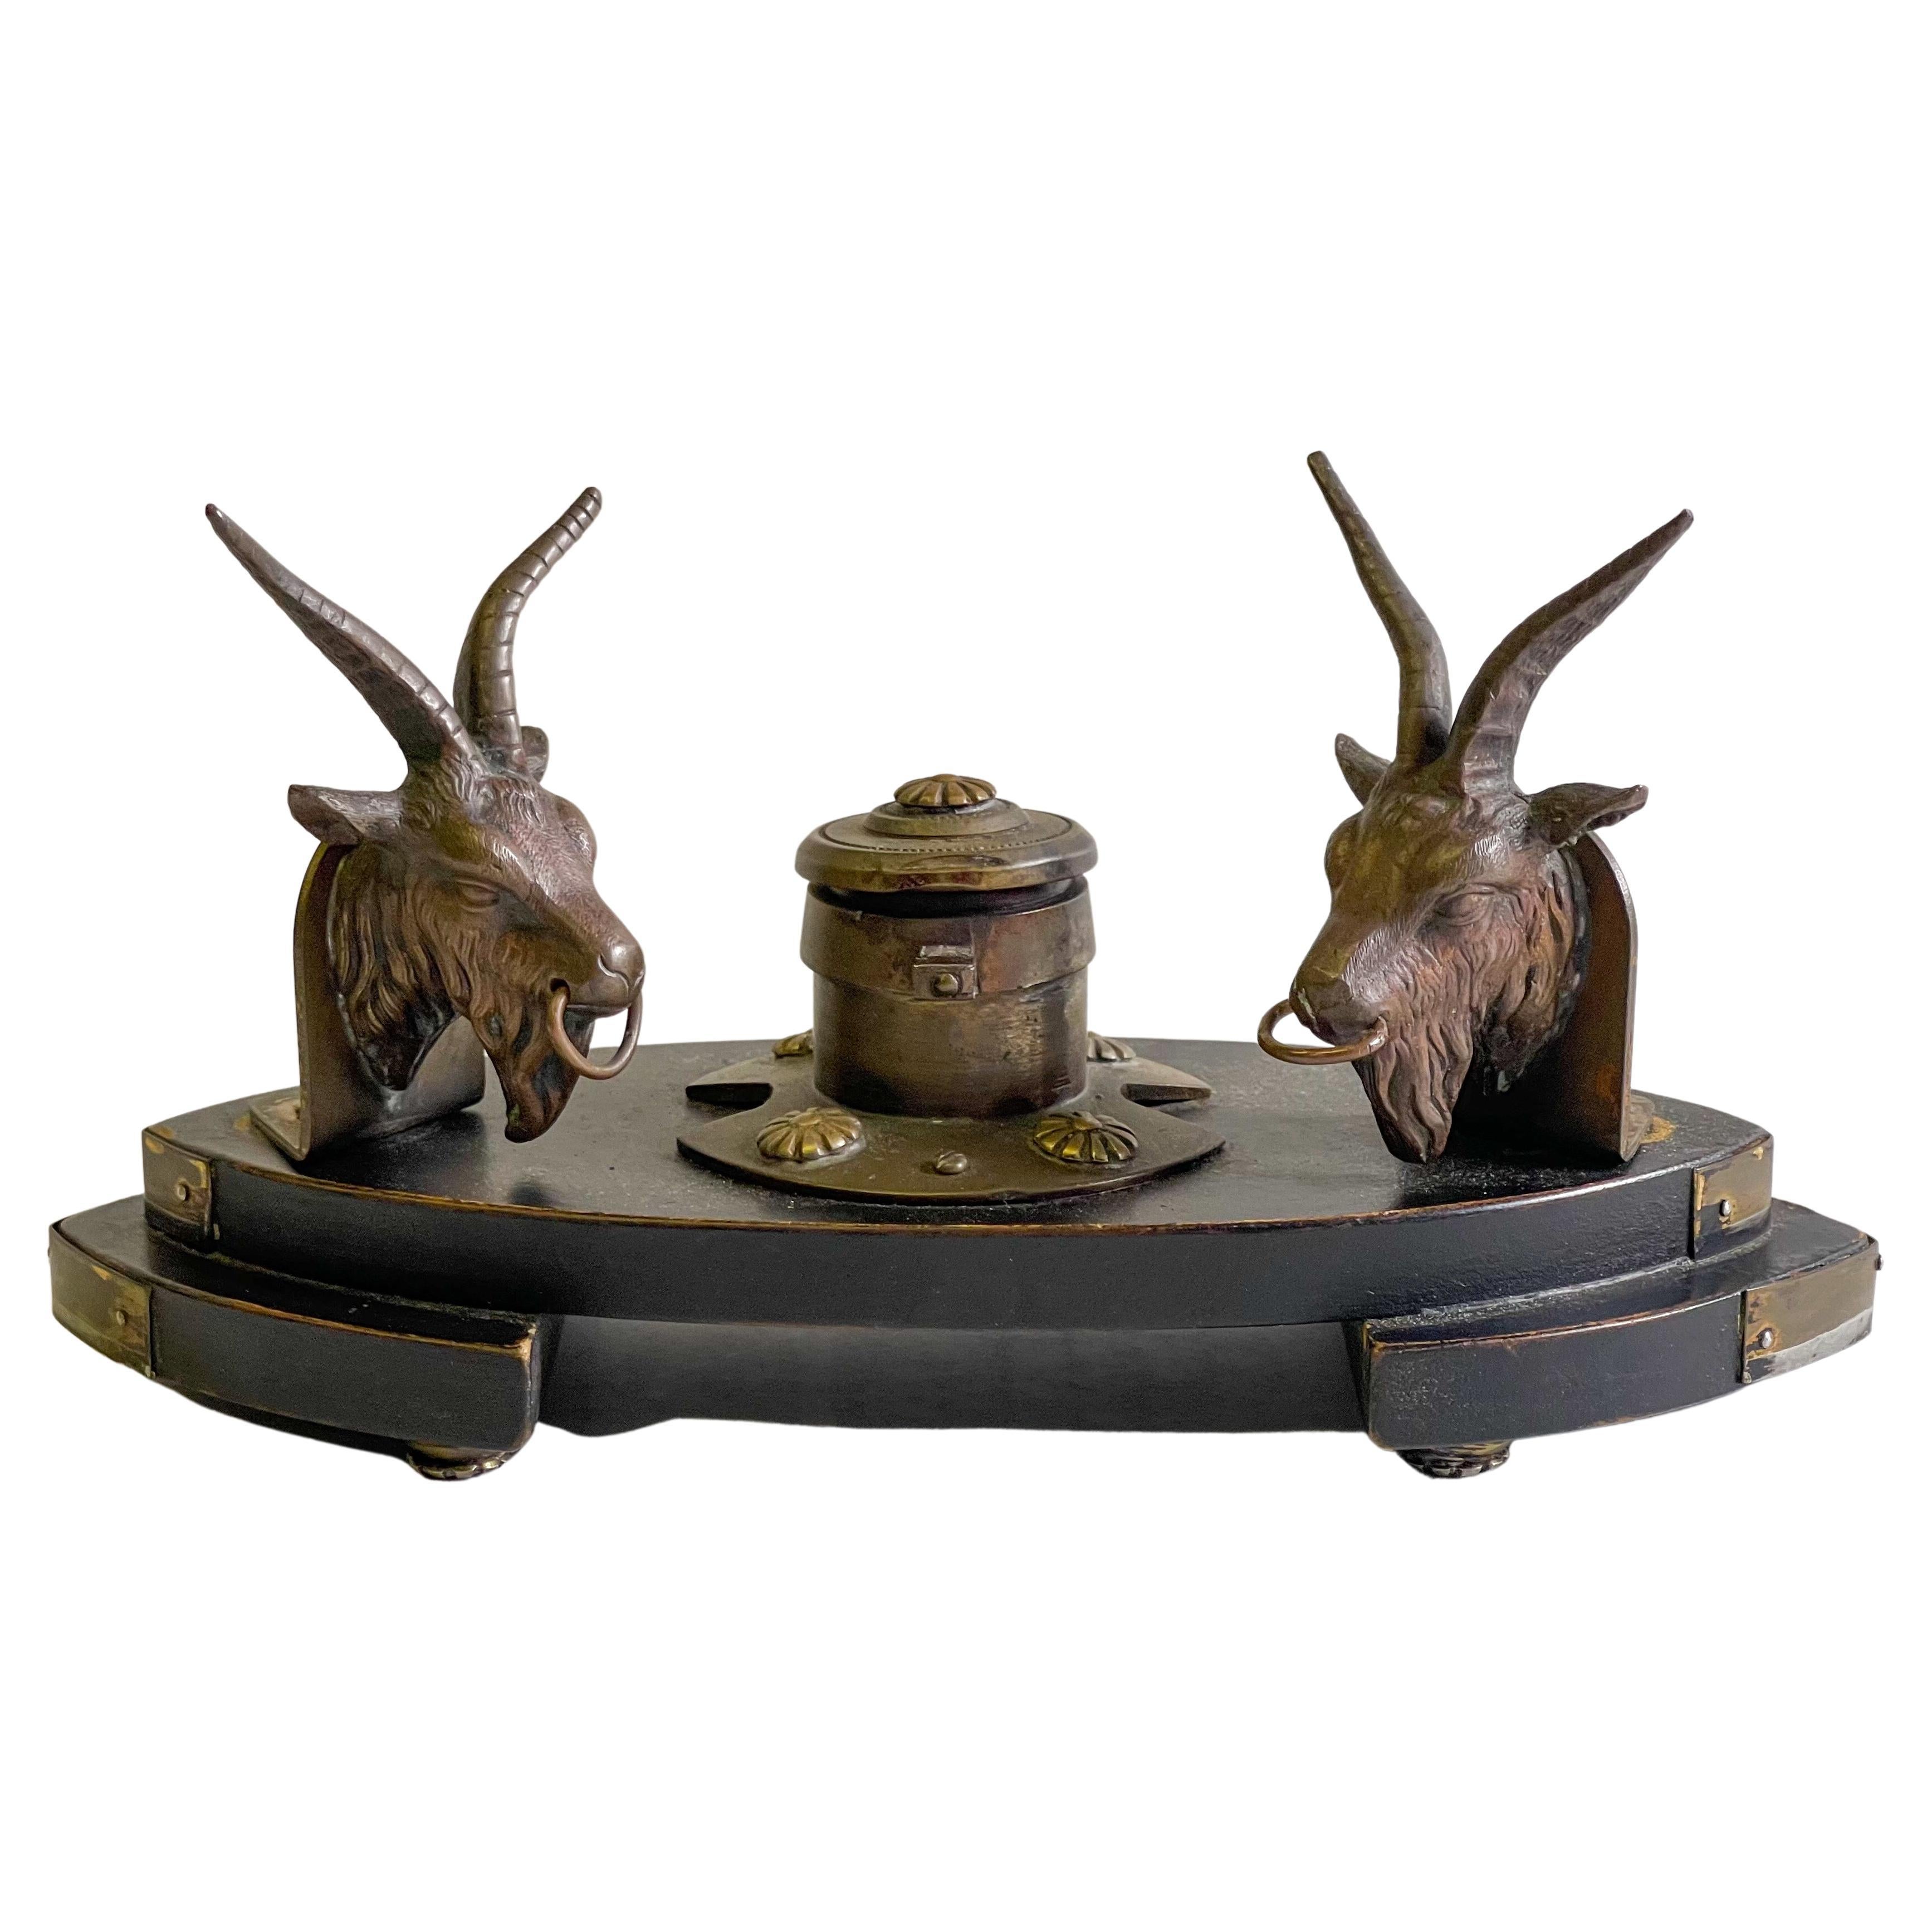 19th-C. French Neo-Classical Style Gilt Bronze Ram Form Inkwell For Sale